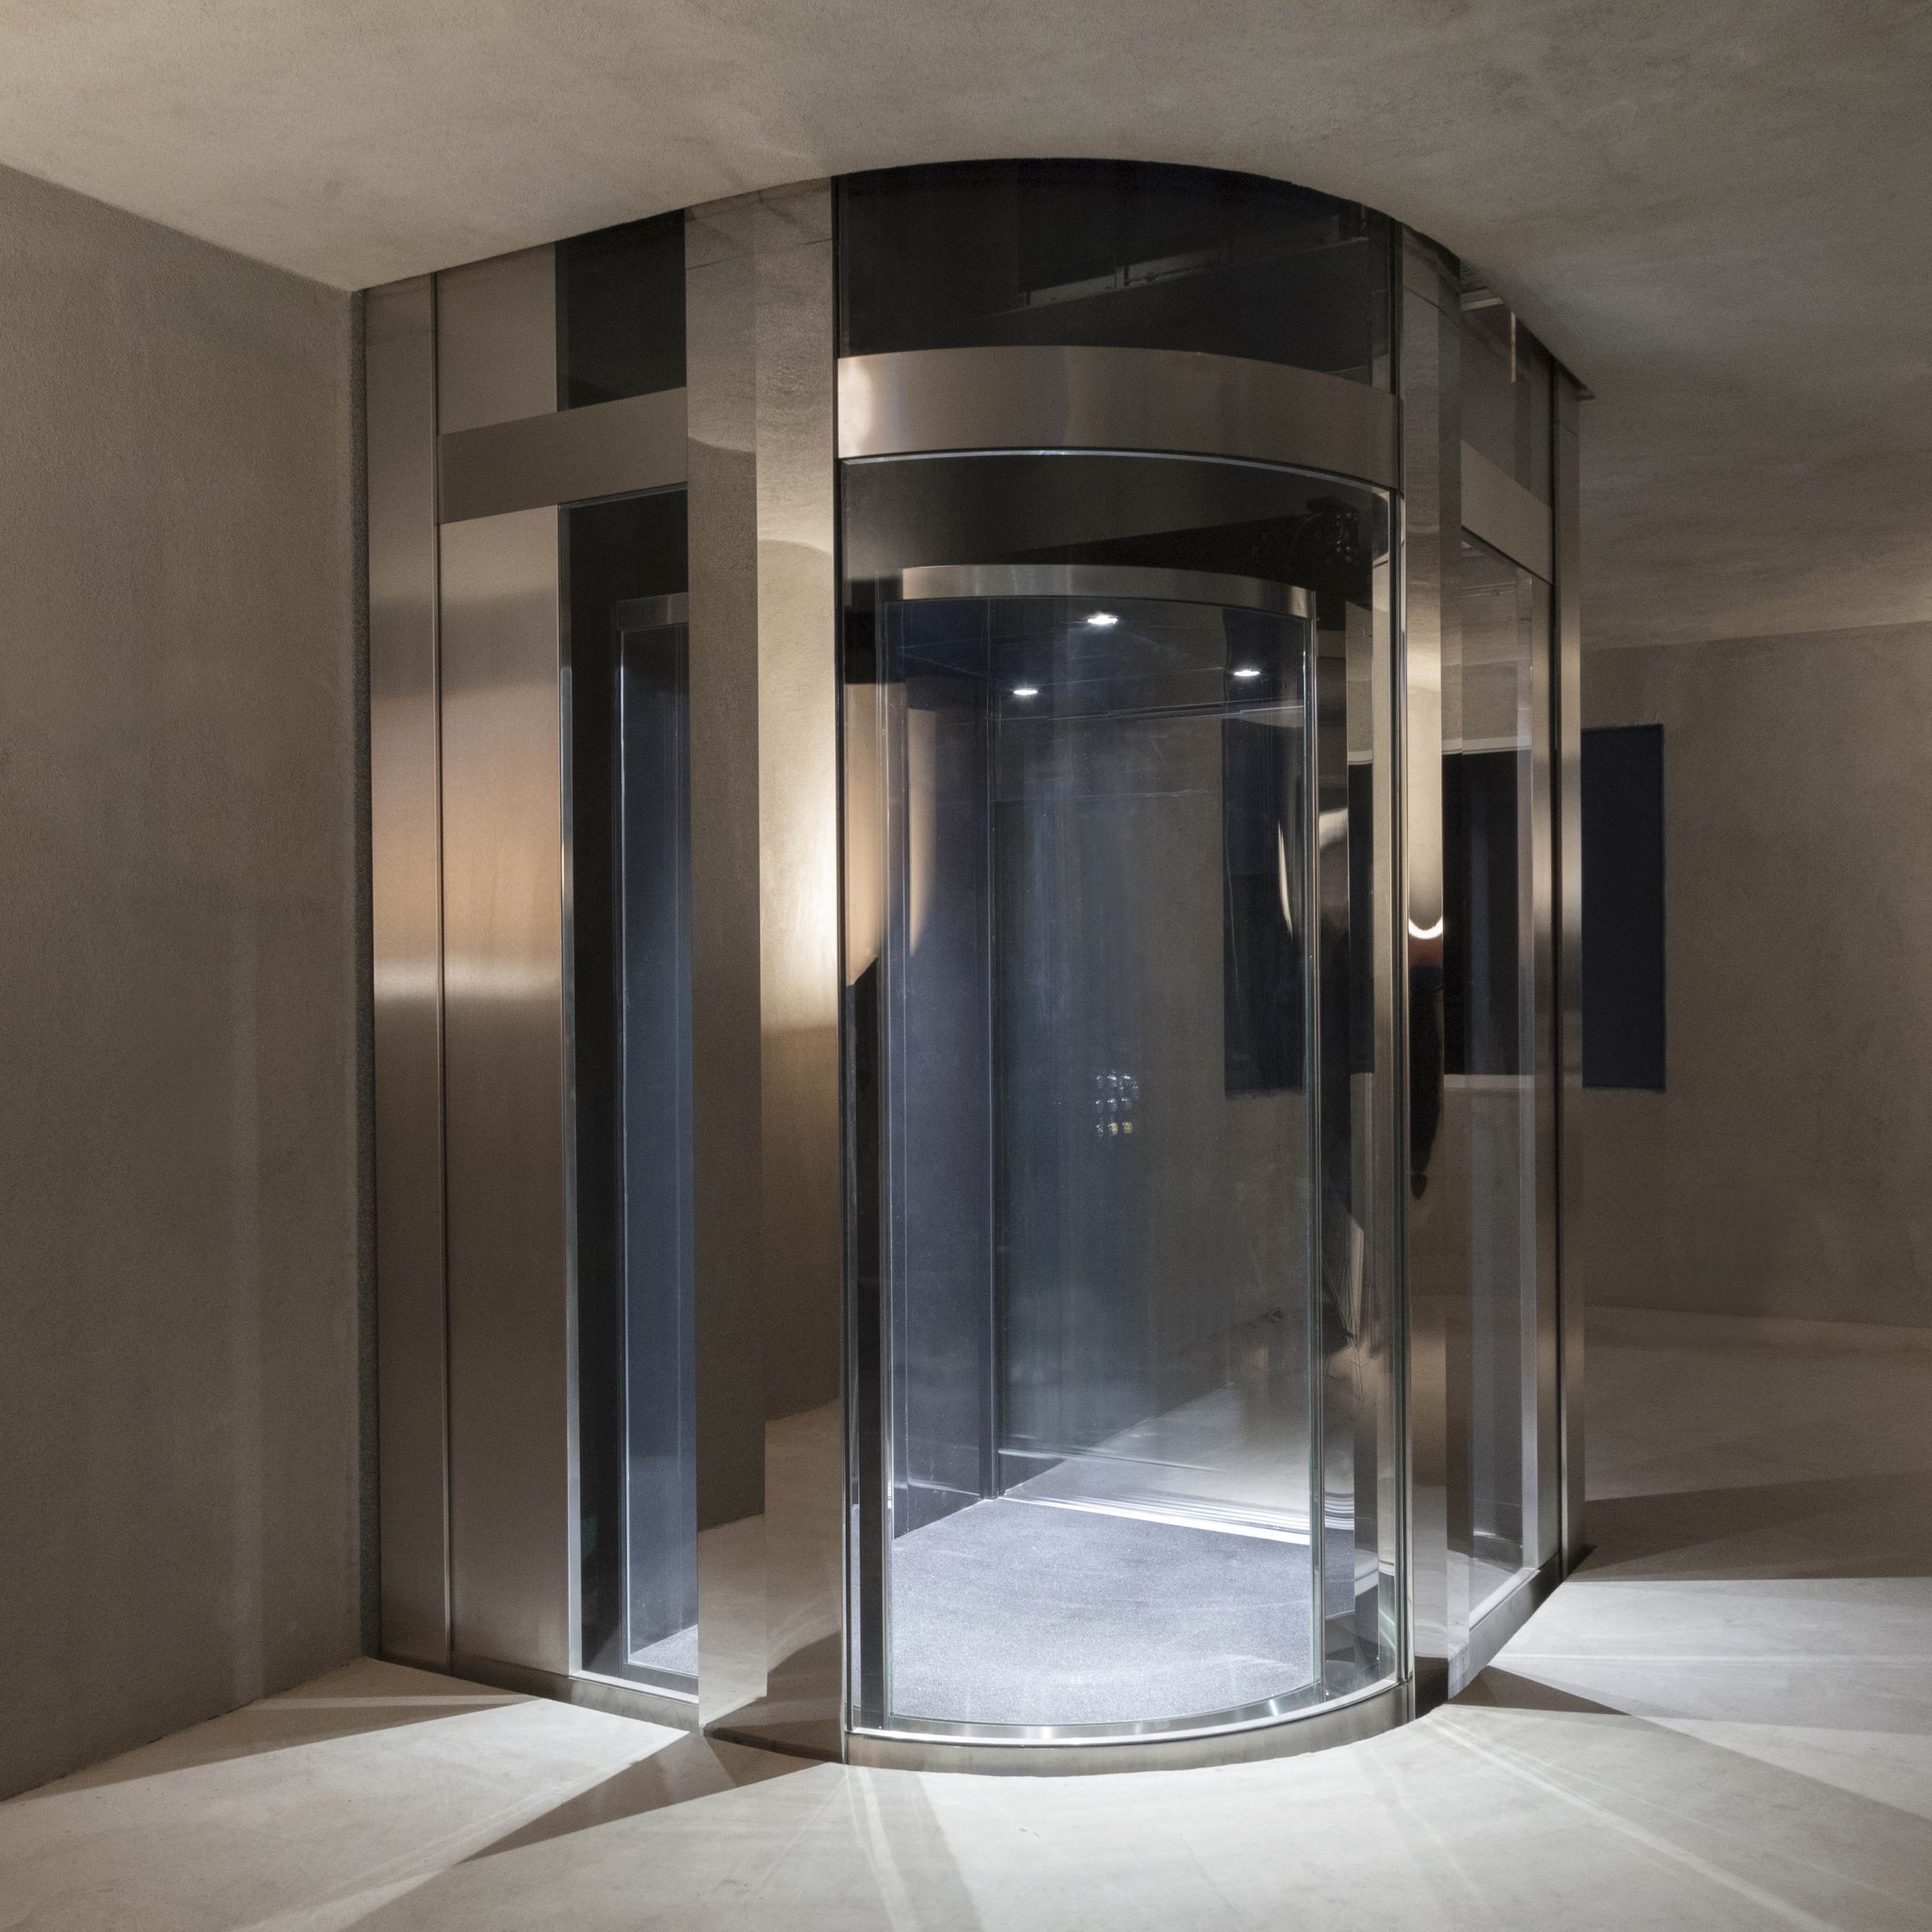 Image of a commercial lift in Melbourne